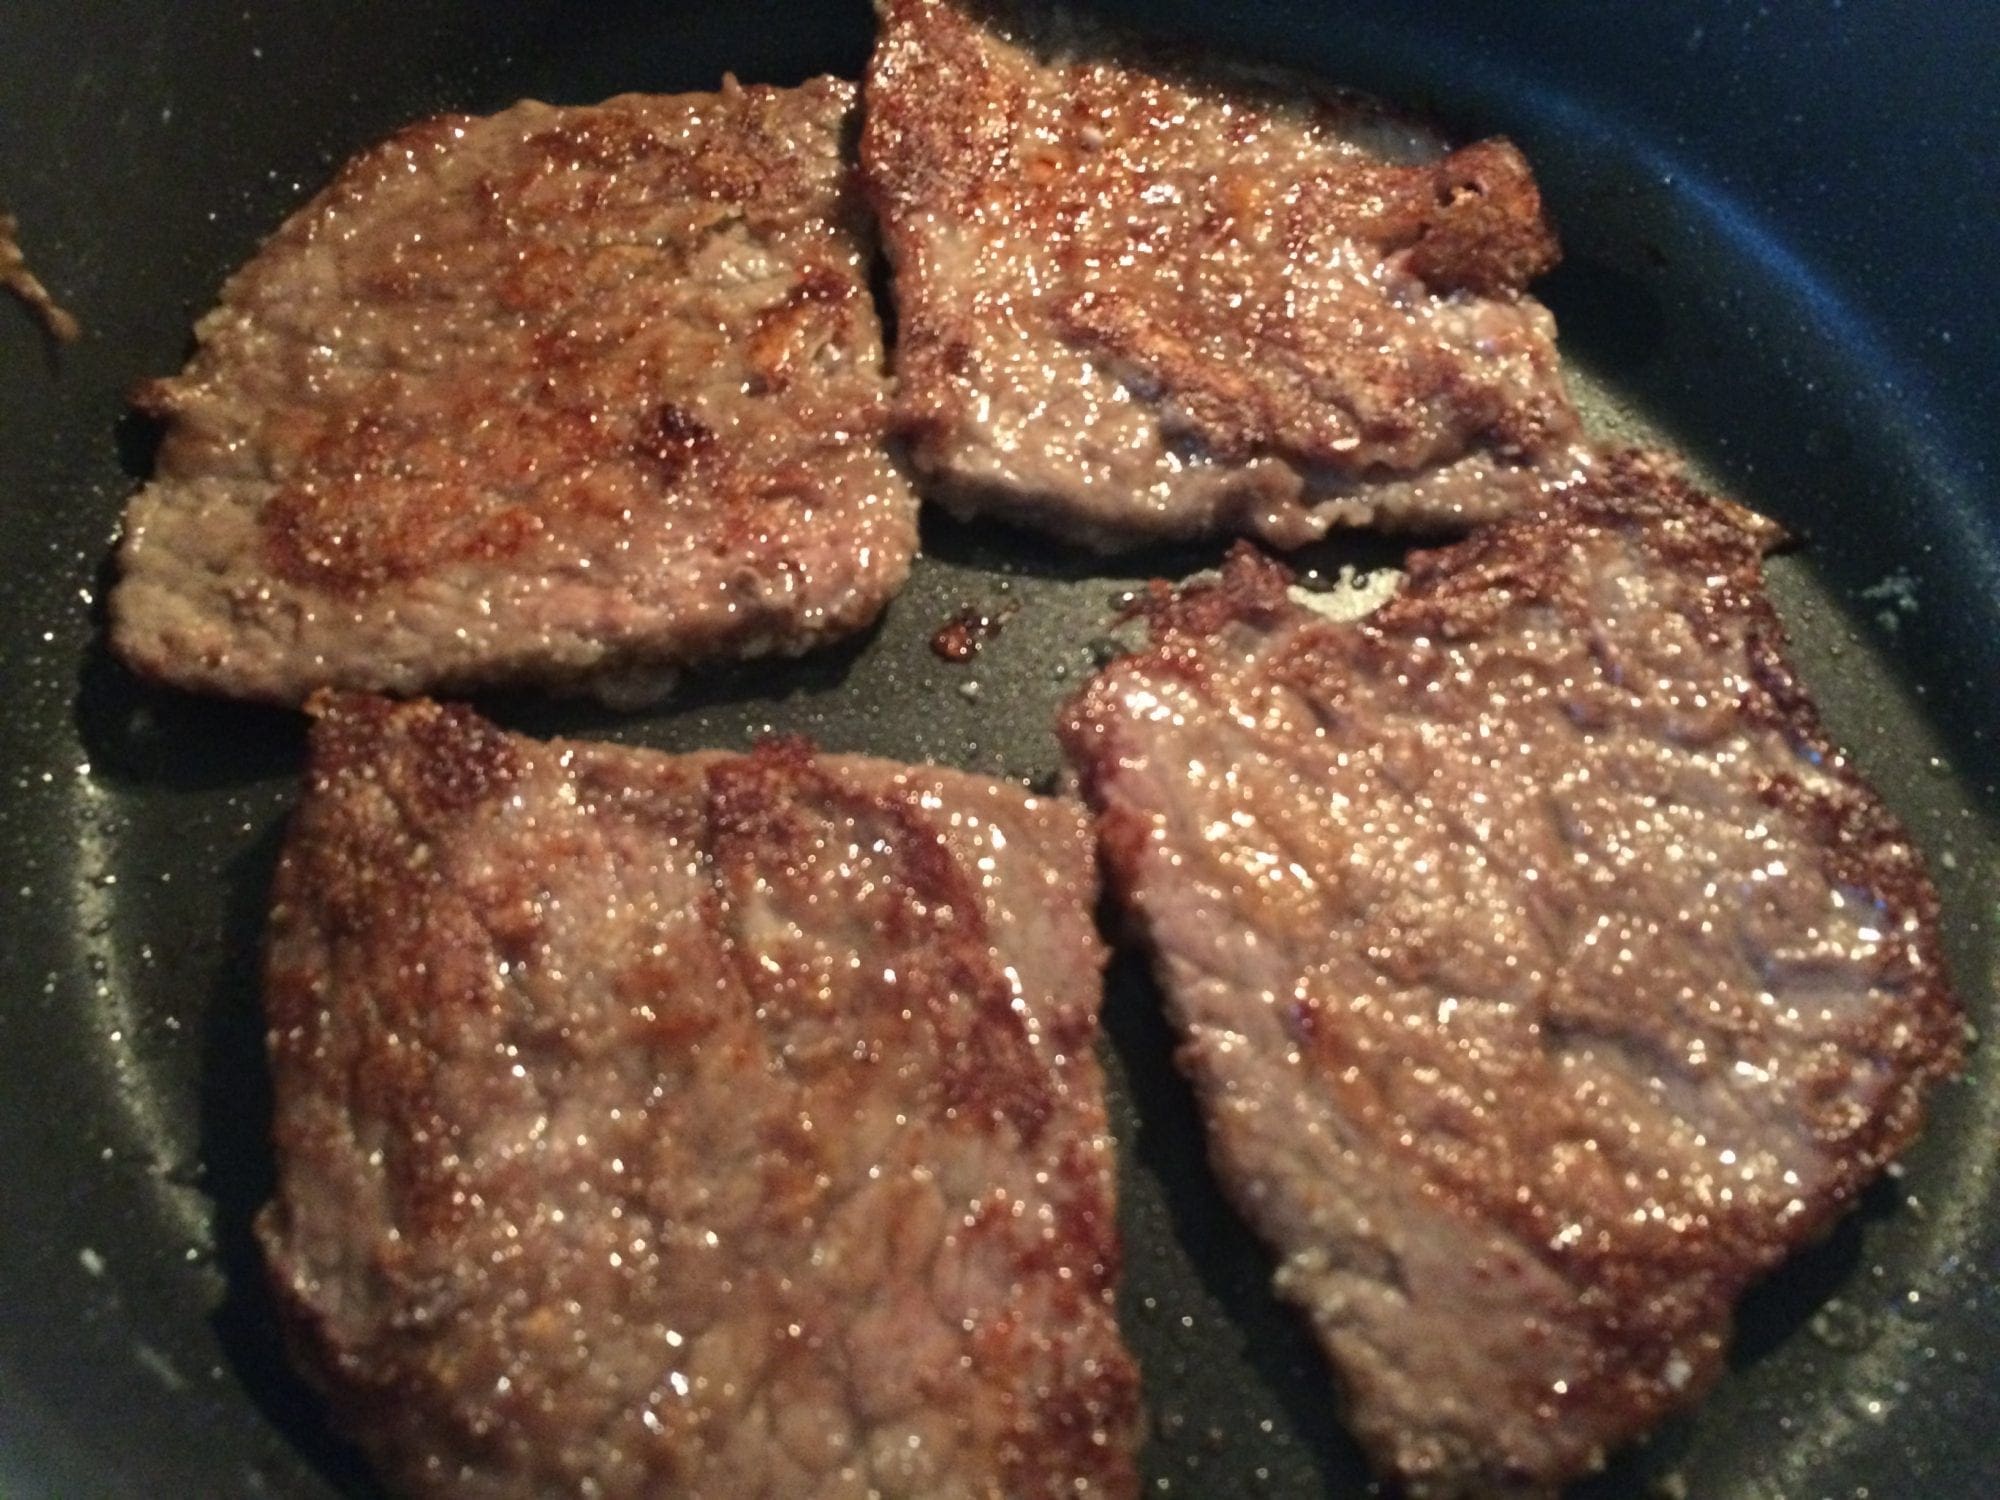 Brown steak for a Beef and Broccoli Stir Fry. Delicious!